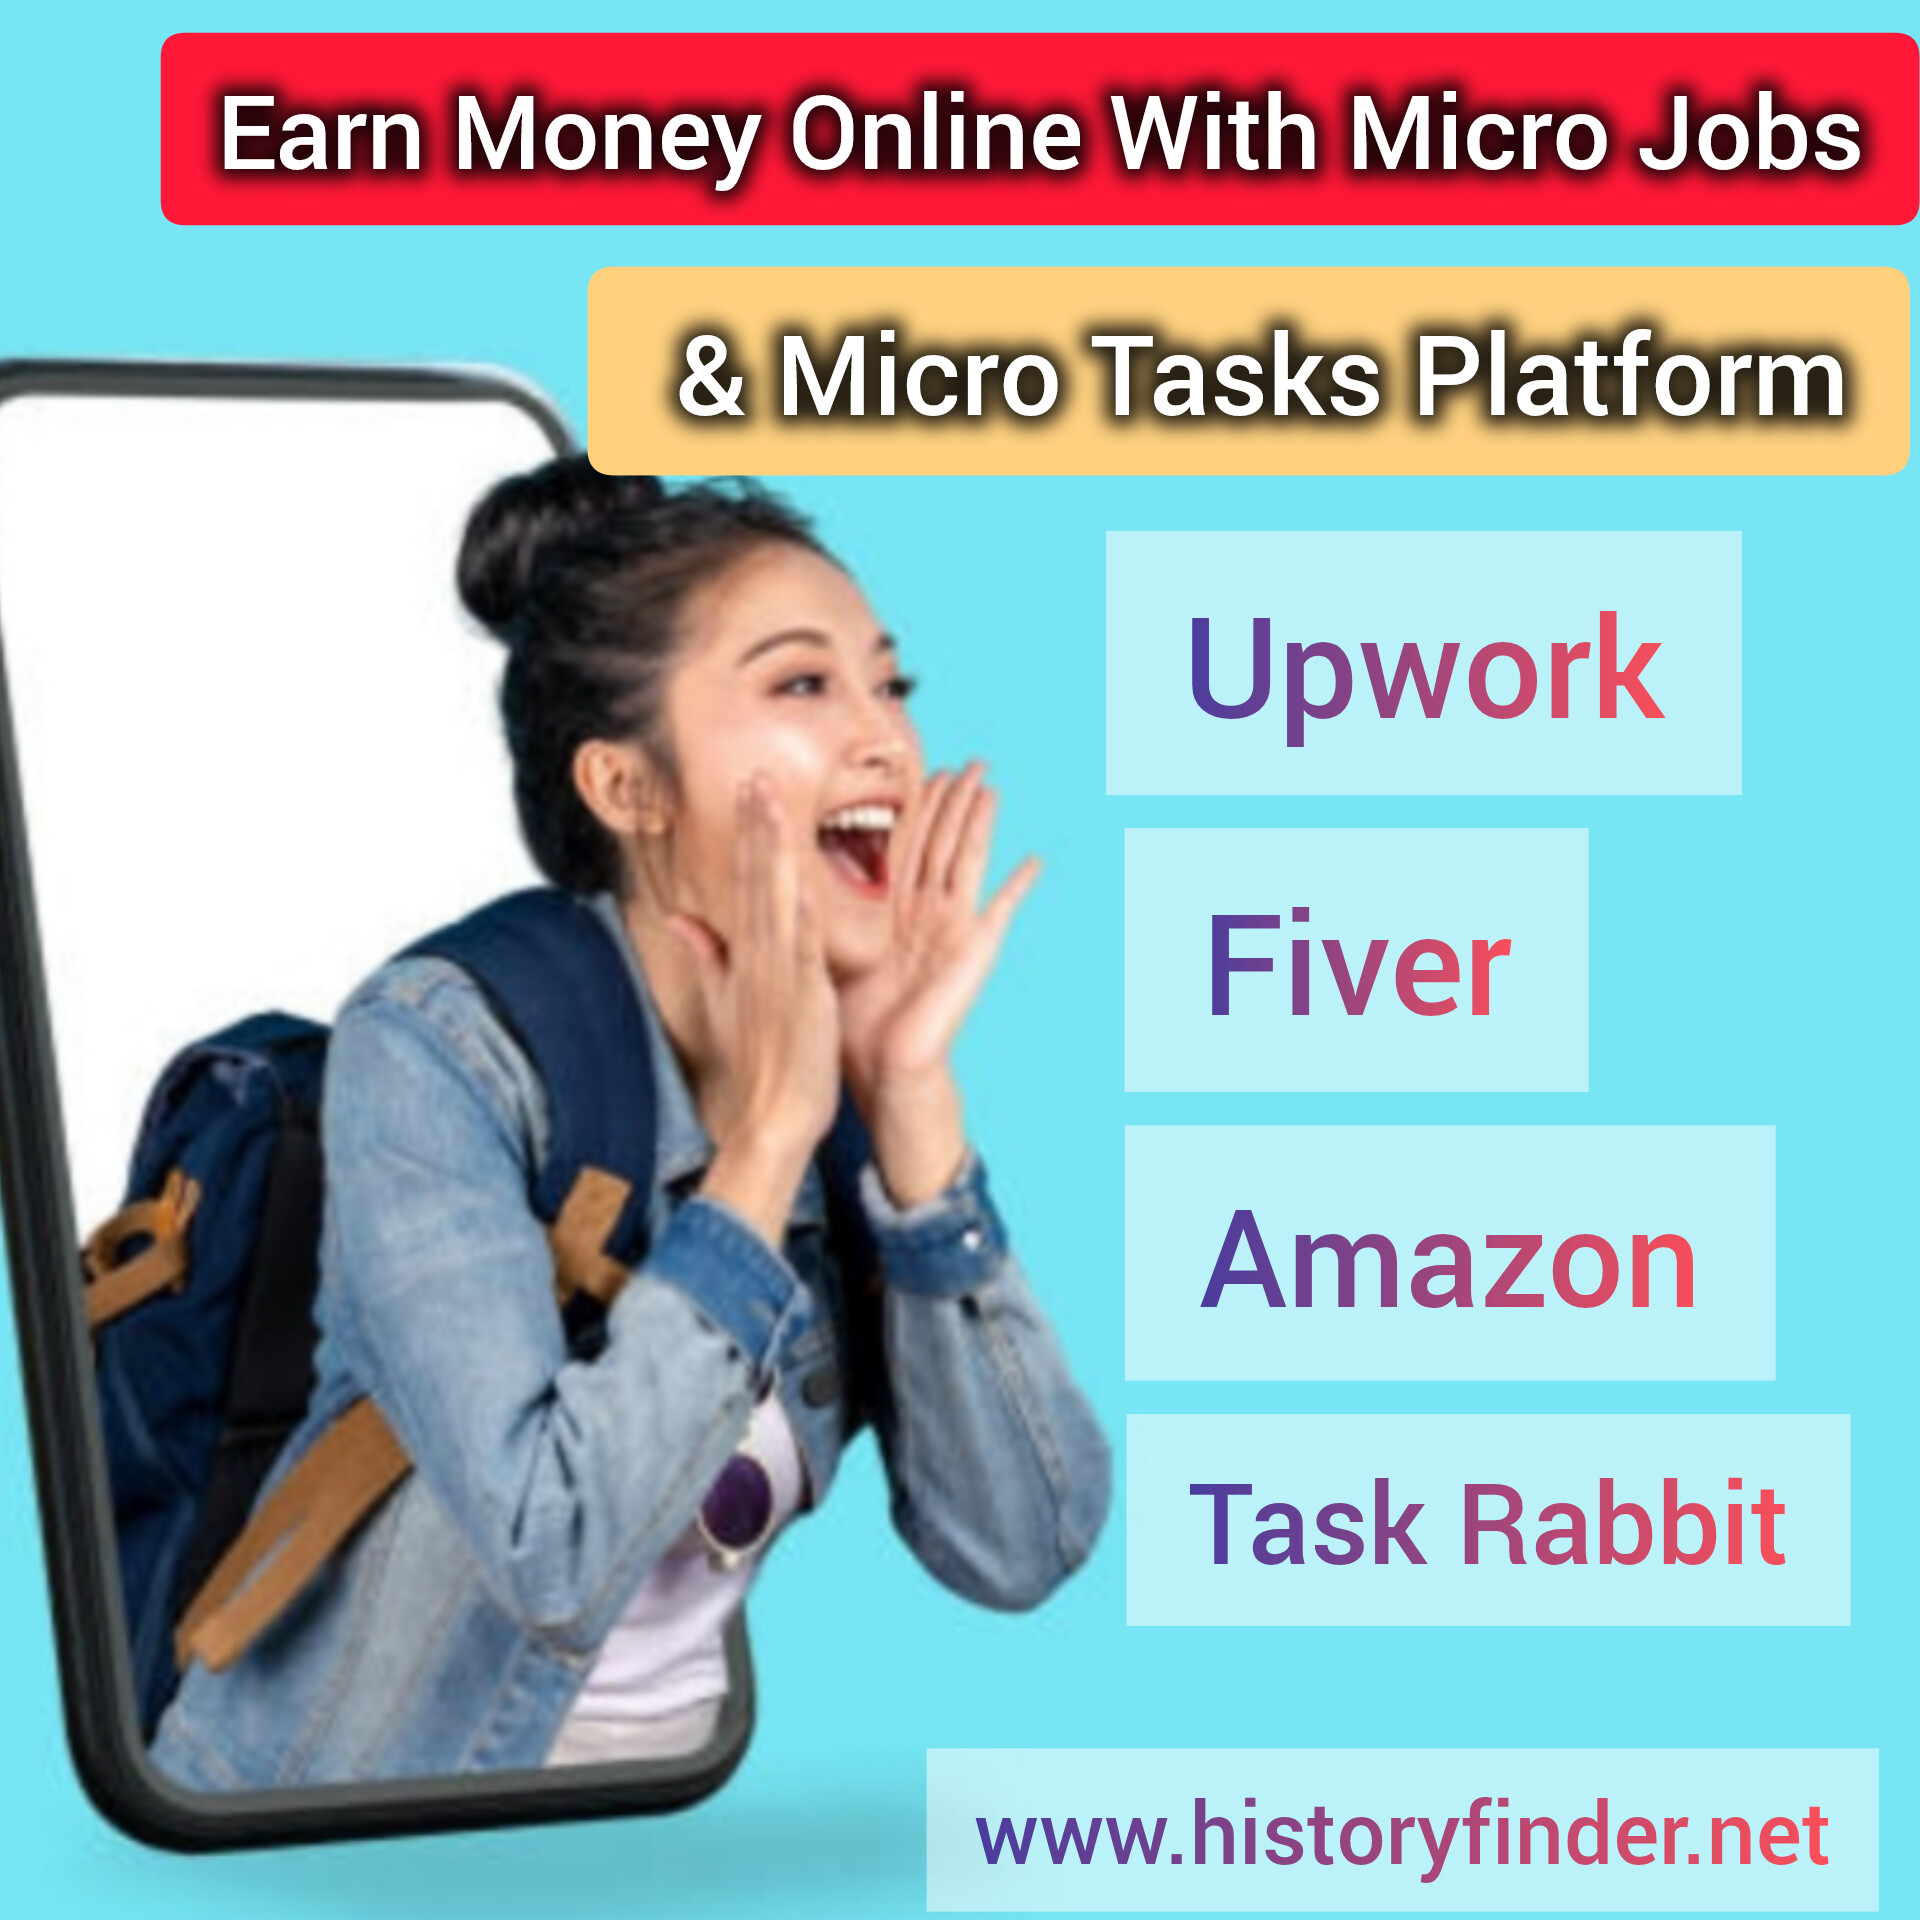 how to earn money online from micro jobs and micro tasks platform